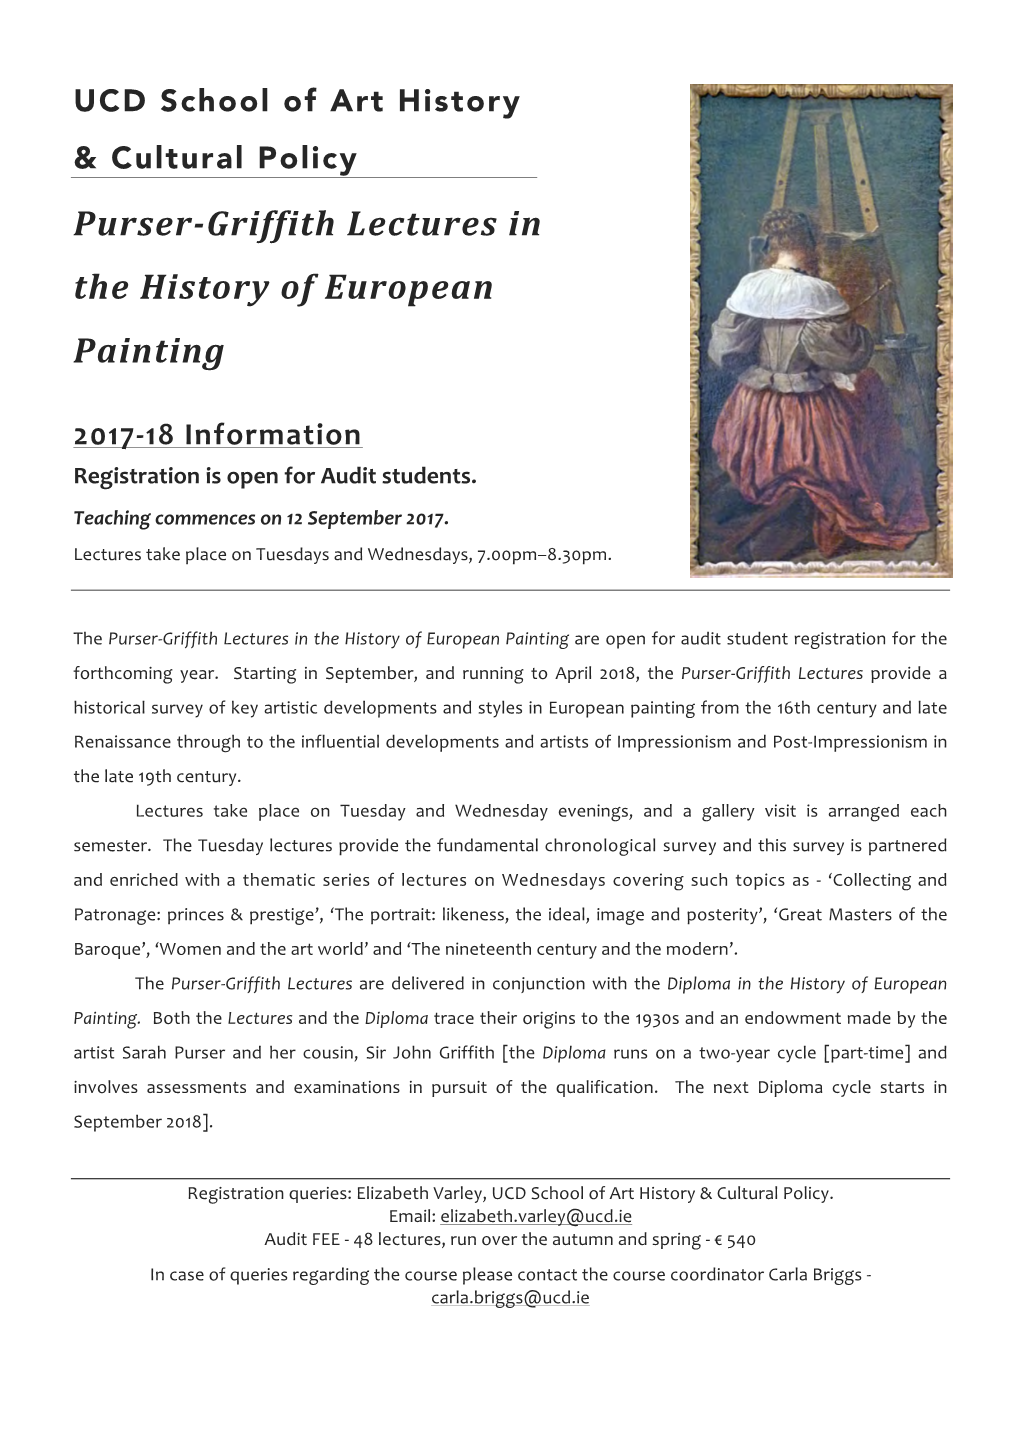 Purser-Griffith Lectures in the History of European Painting